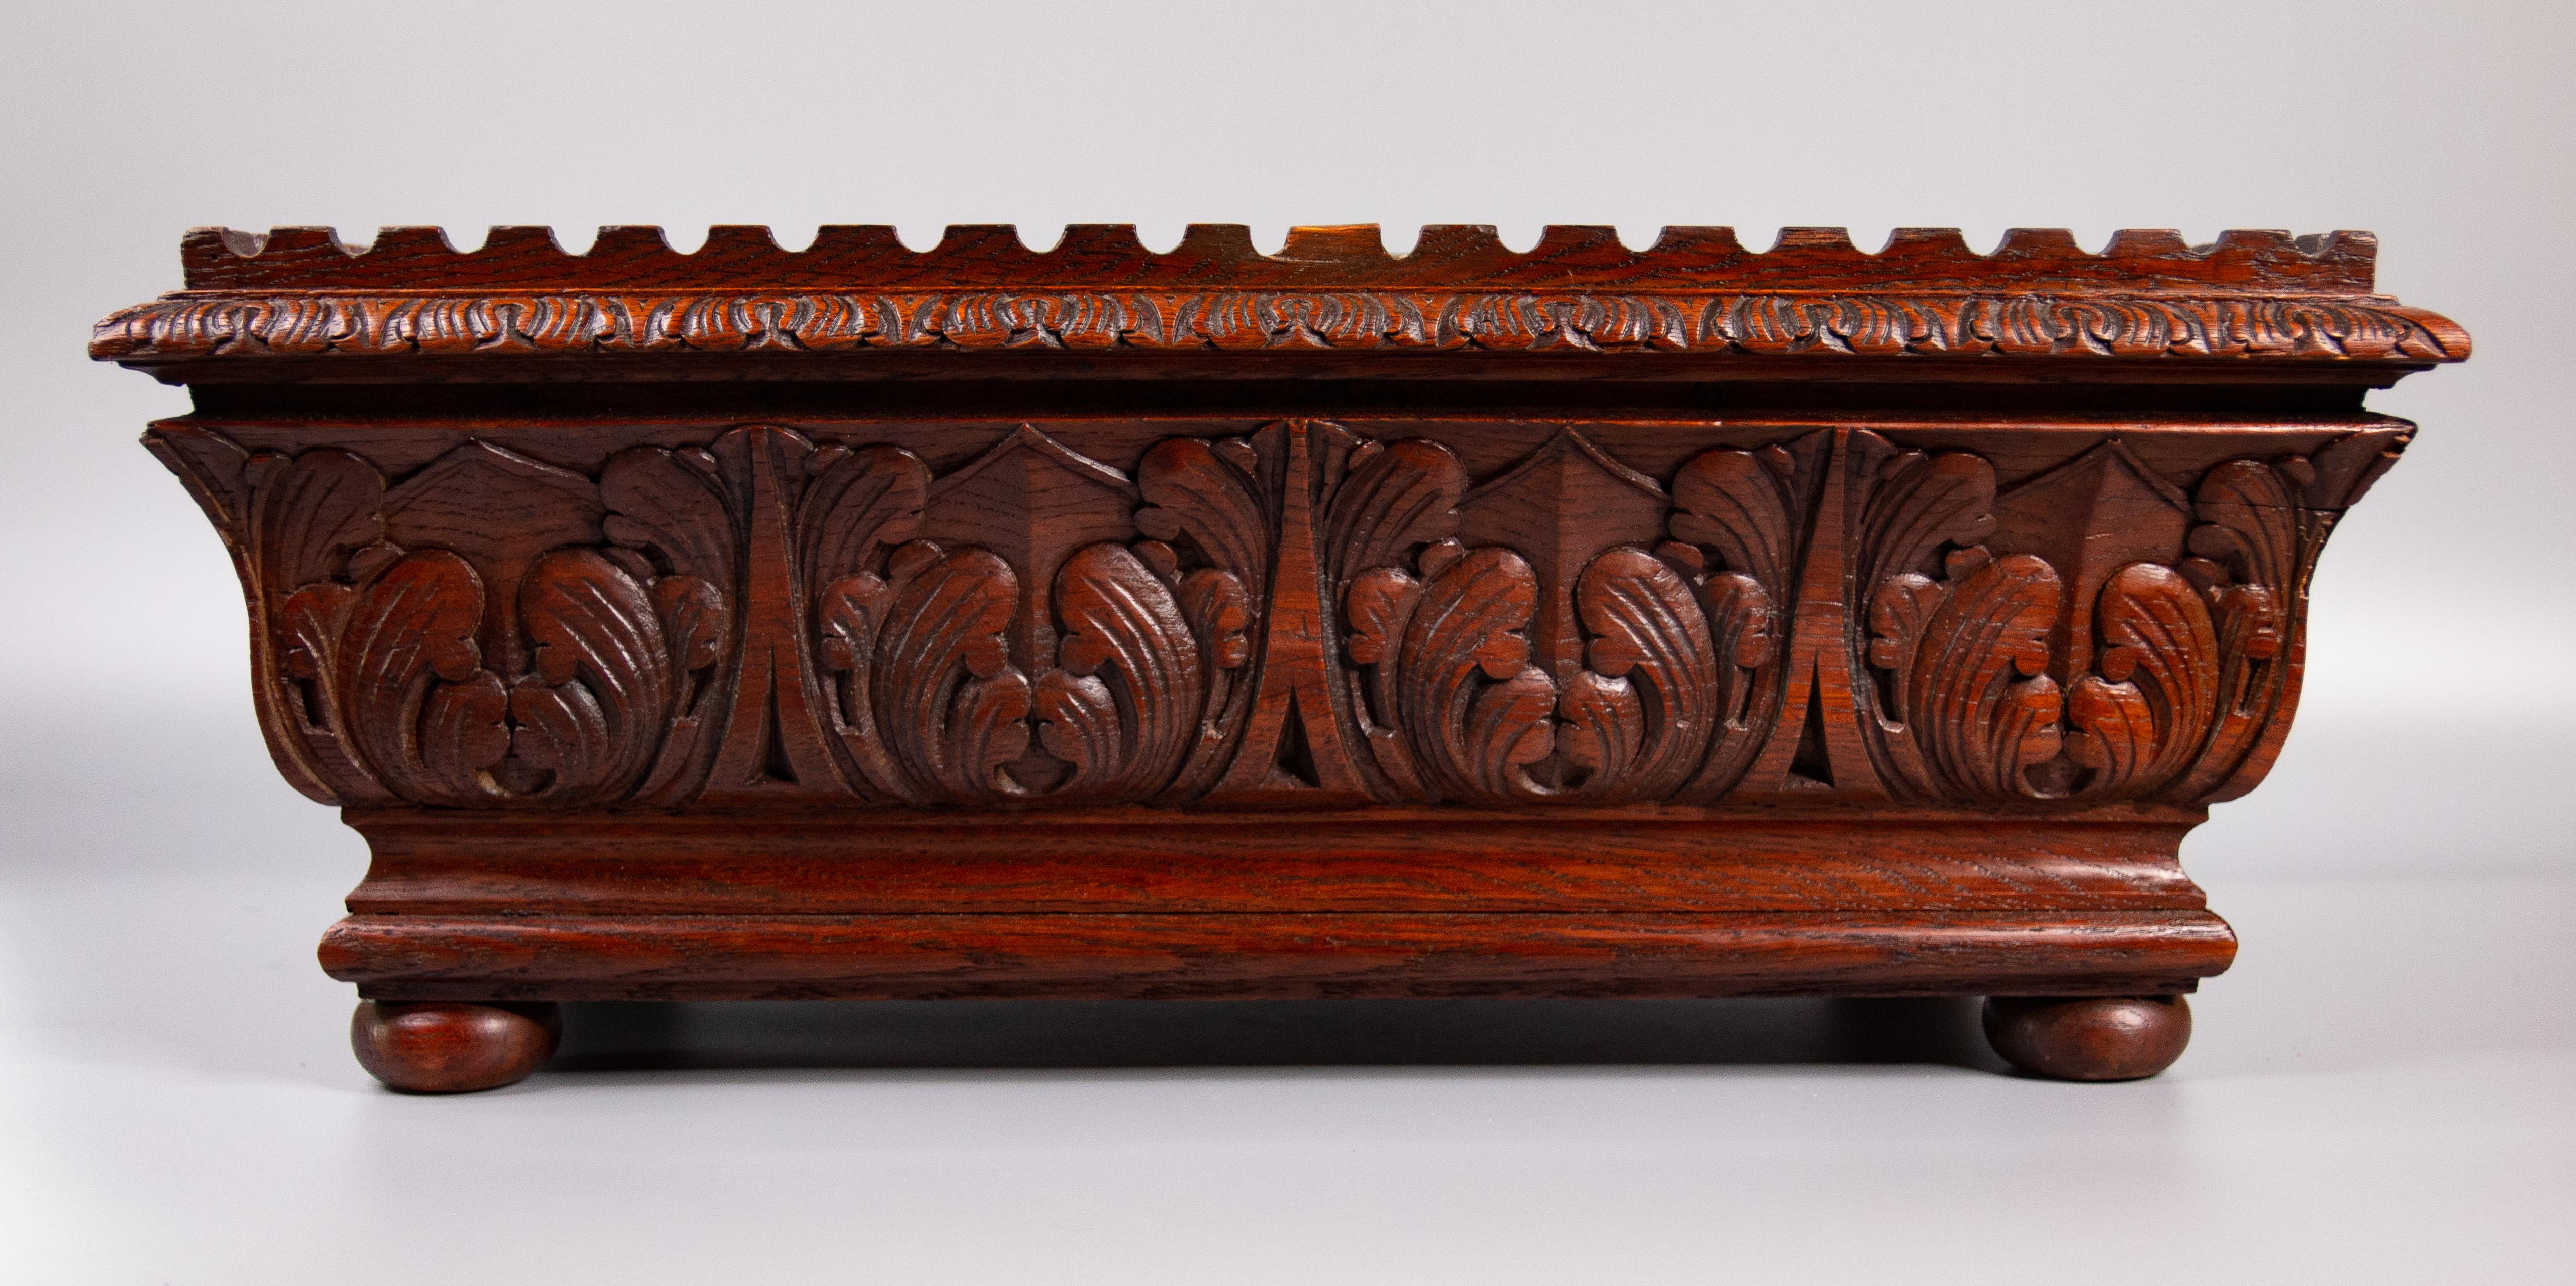 A superb 19th century French hand carved mahogany jardiniere or planter with original tin liner. It's a nice large rectangular size, solid and heavy, with very fine carving and bun feet. It would make a fabulous table centerpiece displayed with a